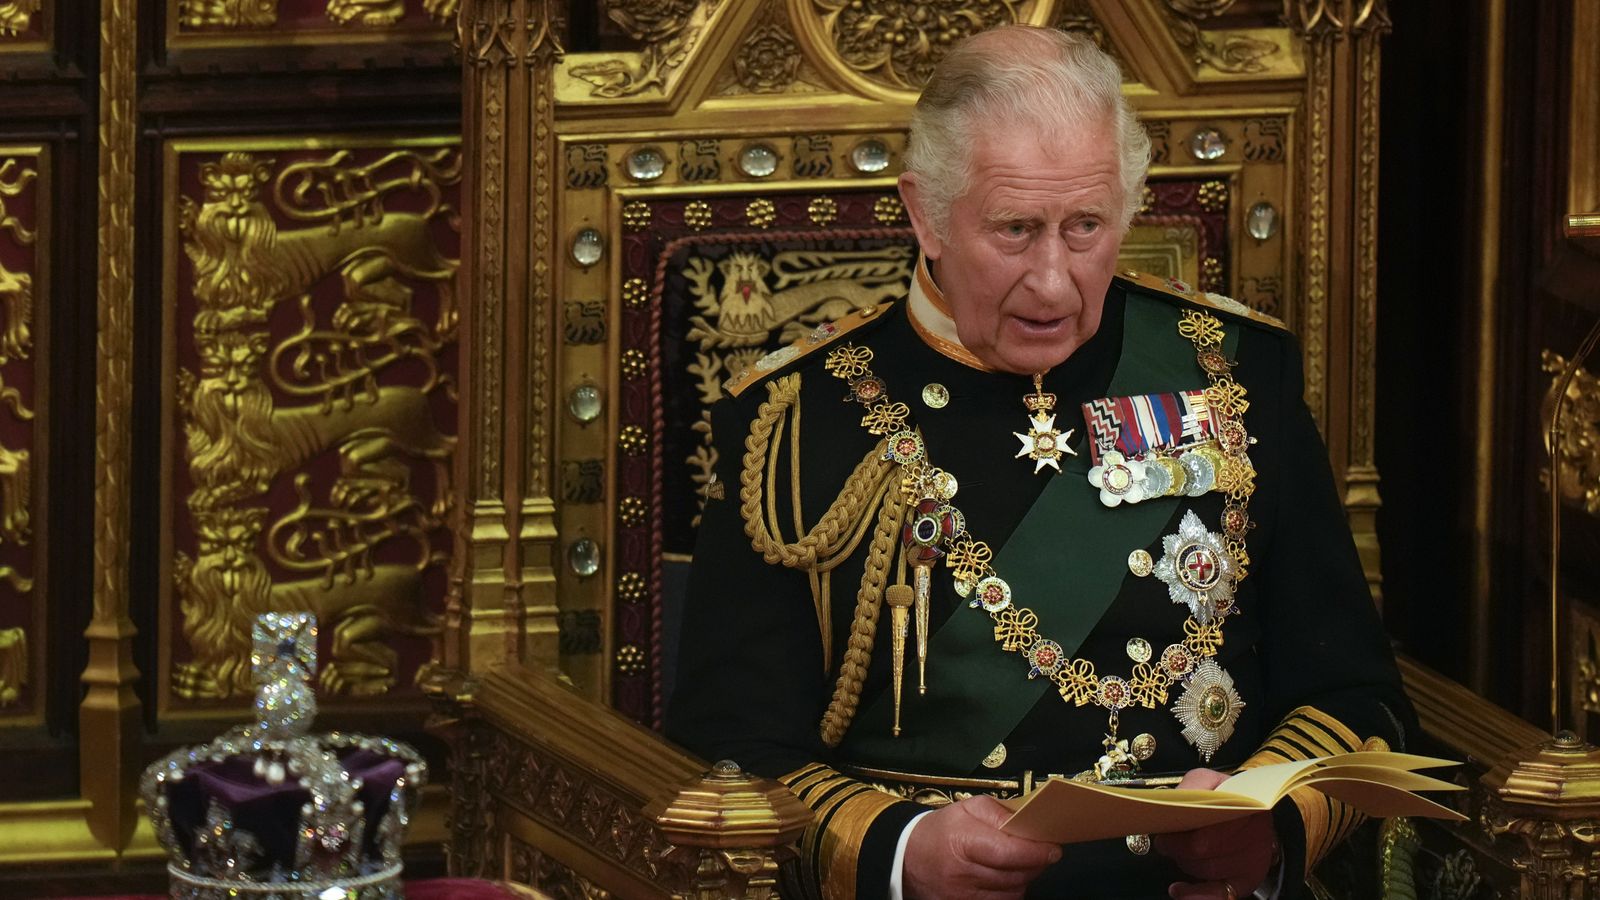 King's Speech: Government to unveil plans centred around criminal justice